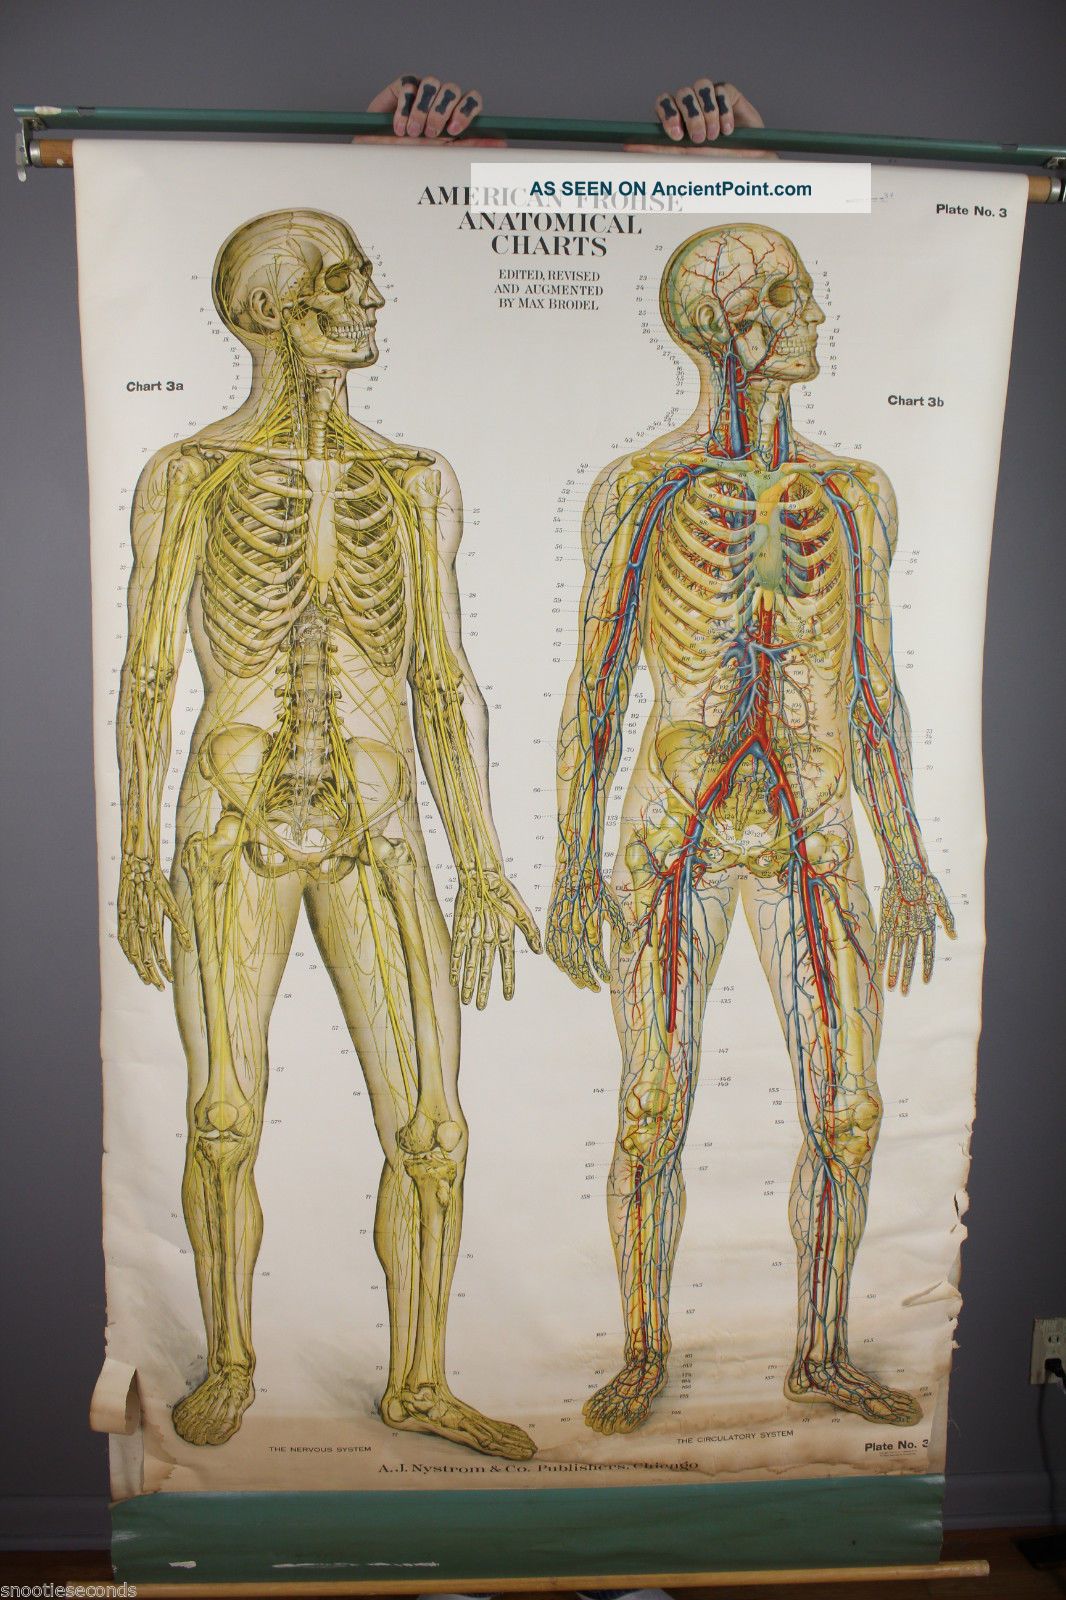 American Frohse Anatomical Charts Labeled